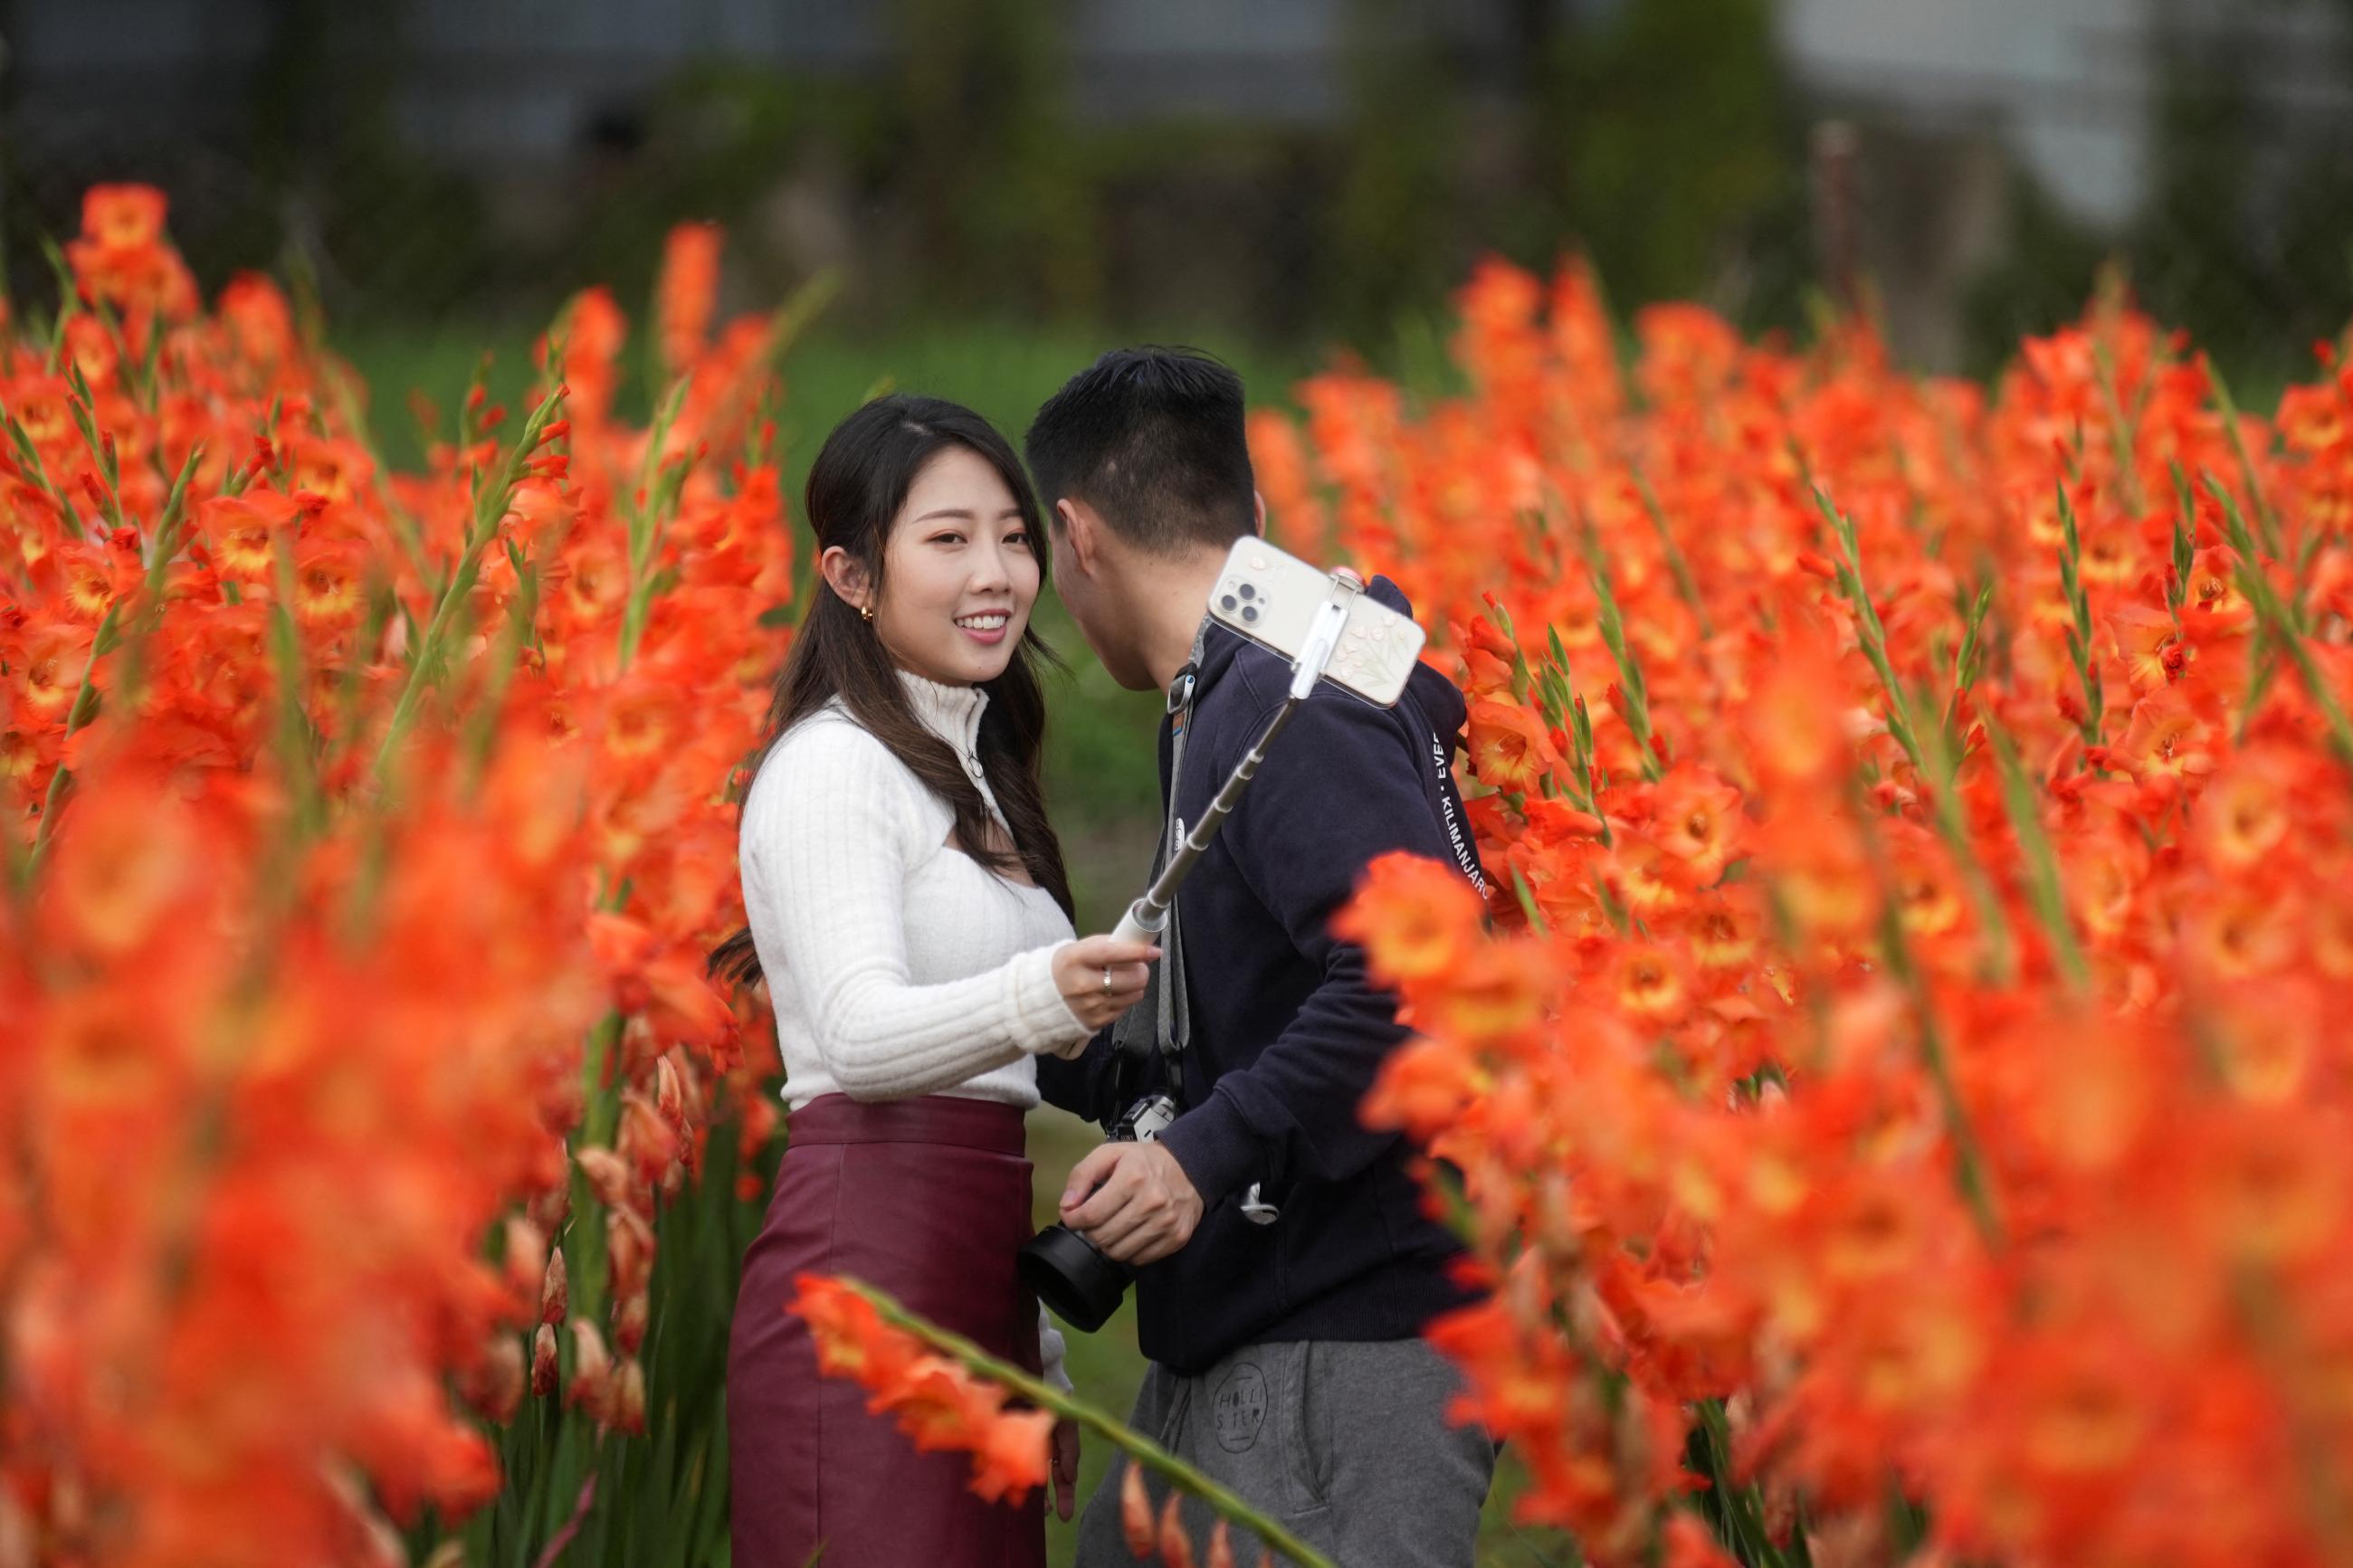 Surrounded by a field of orange flowers, visitors take a selfie at Leung Yat-Shen's flower farm after the government announced the closure of Lunar New Year flower fairs to curb COVID, in Hong Kong, January 27, 2022.